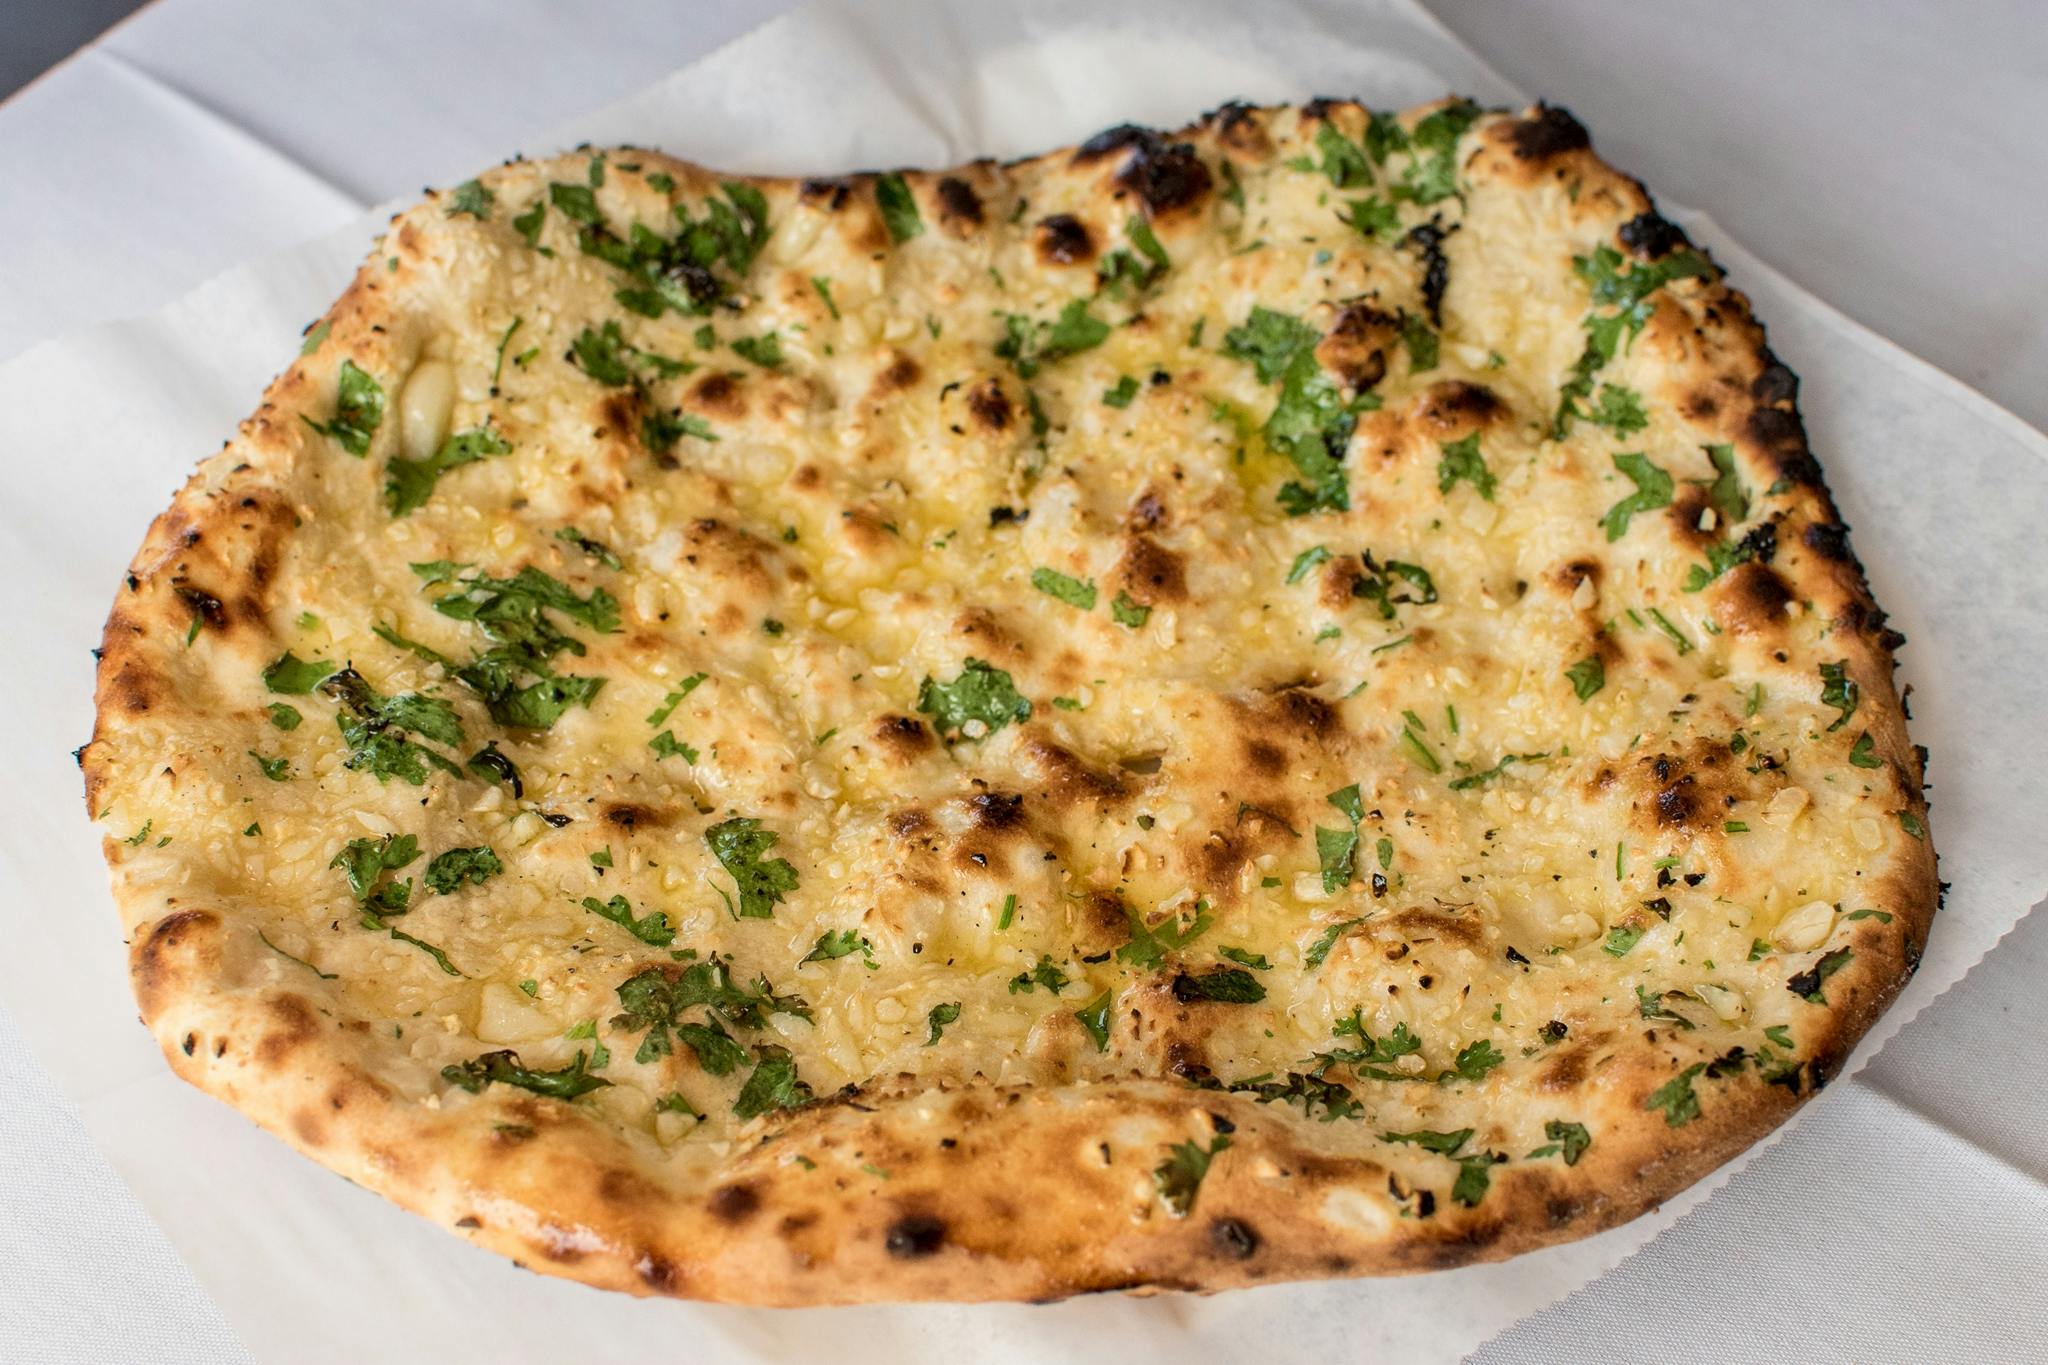 Garlic Naan from Dhaba Indian Bistro in Middleton, WI